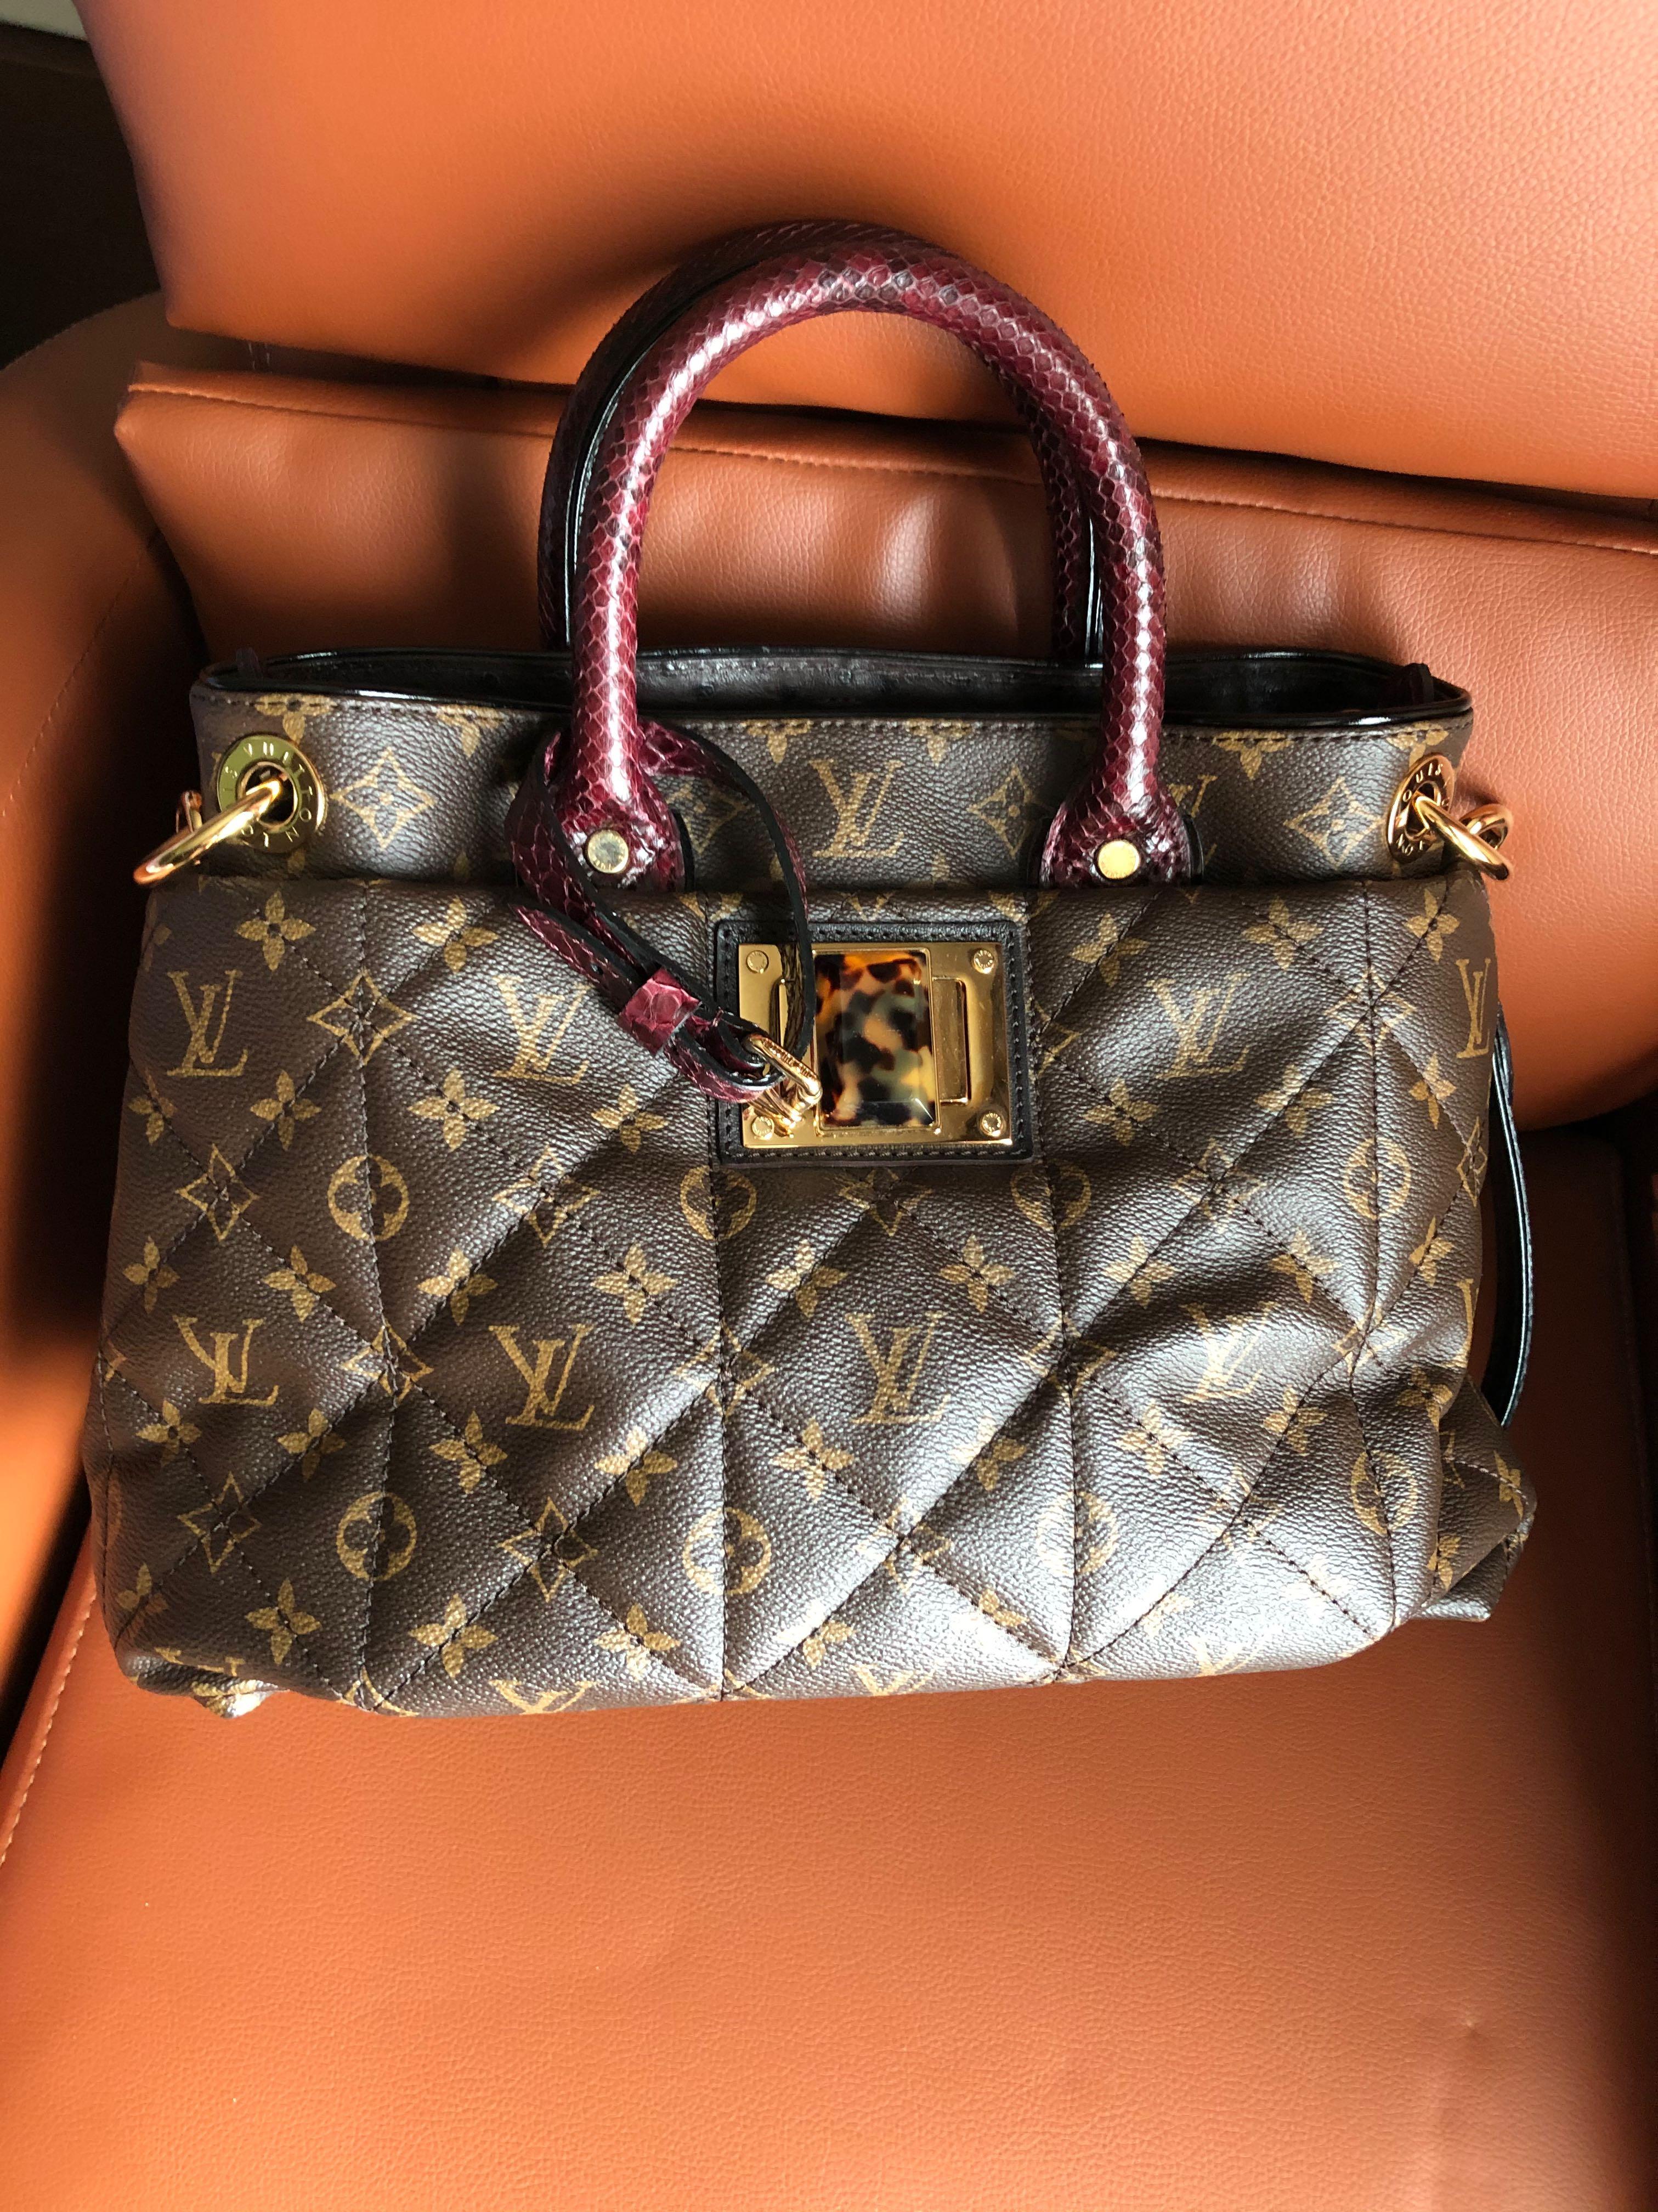 Louis Vuitton ostrich and snakeskin Etoile Exotique tote GM